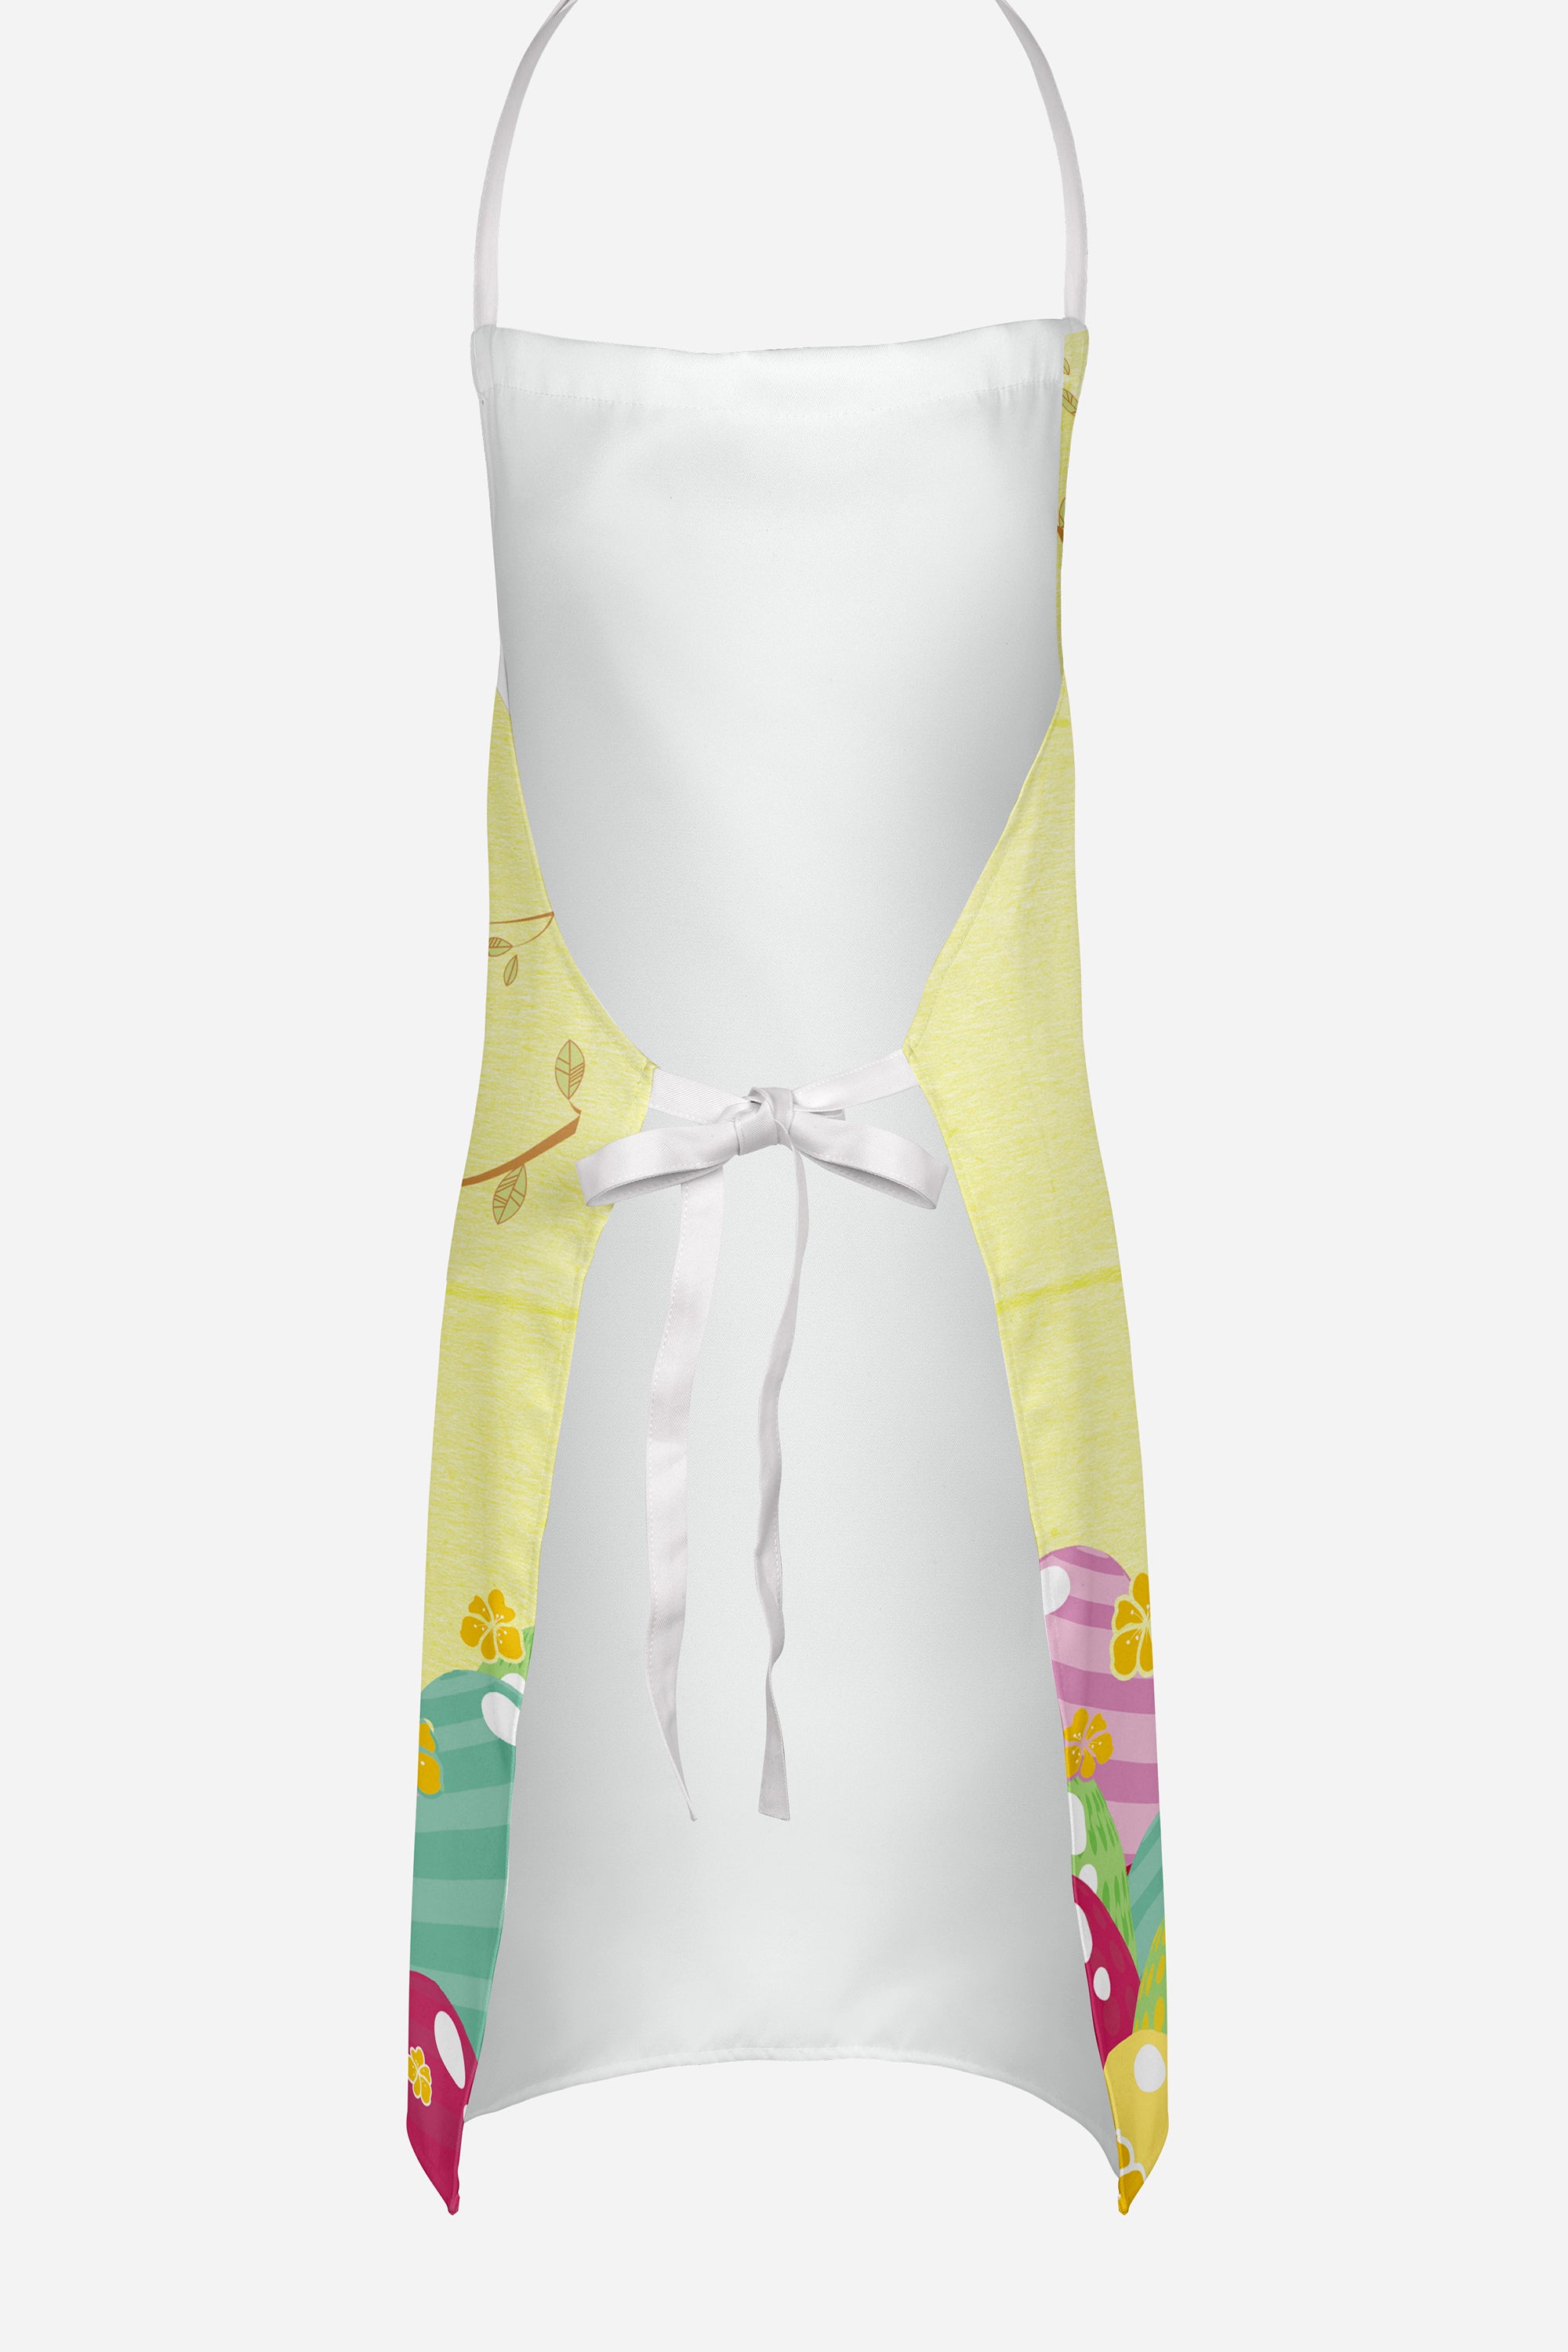 Easter Eggs Chinese Crested Cream Apron BB6113APRON  the-store.com.